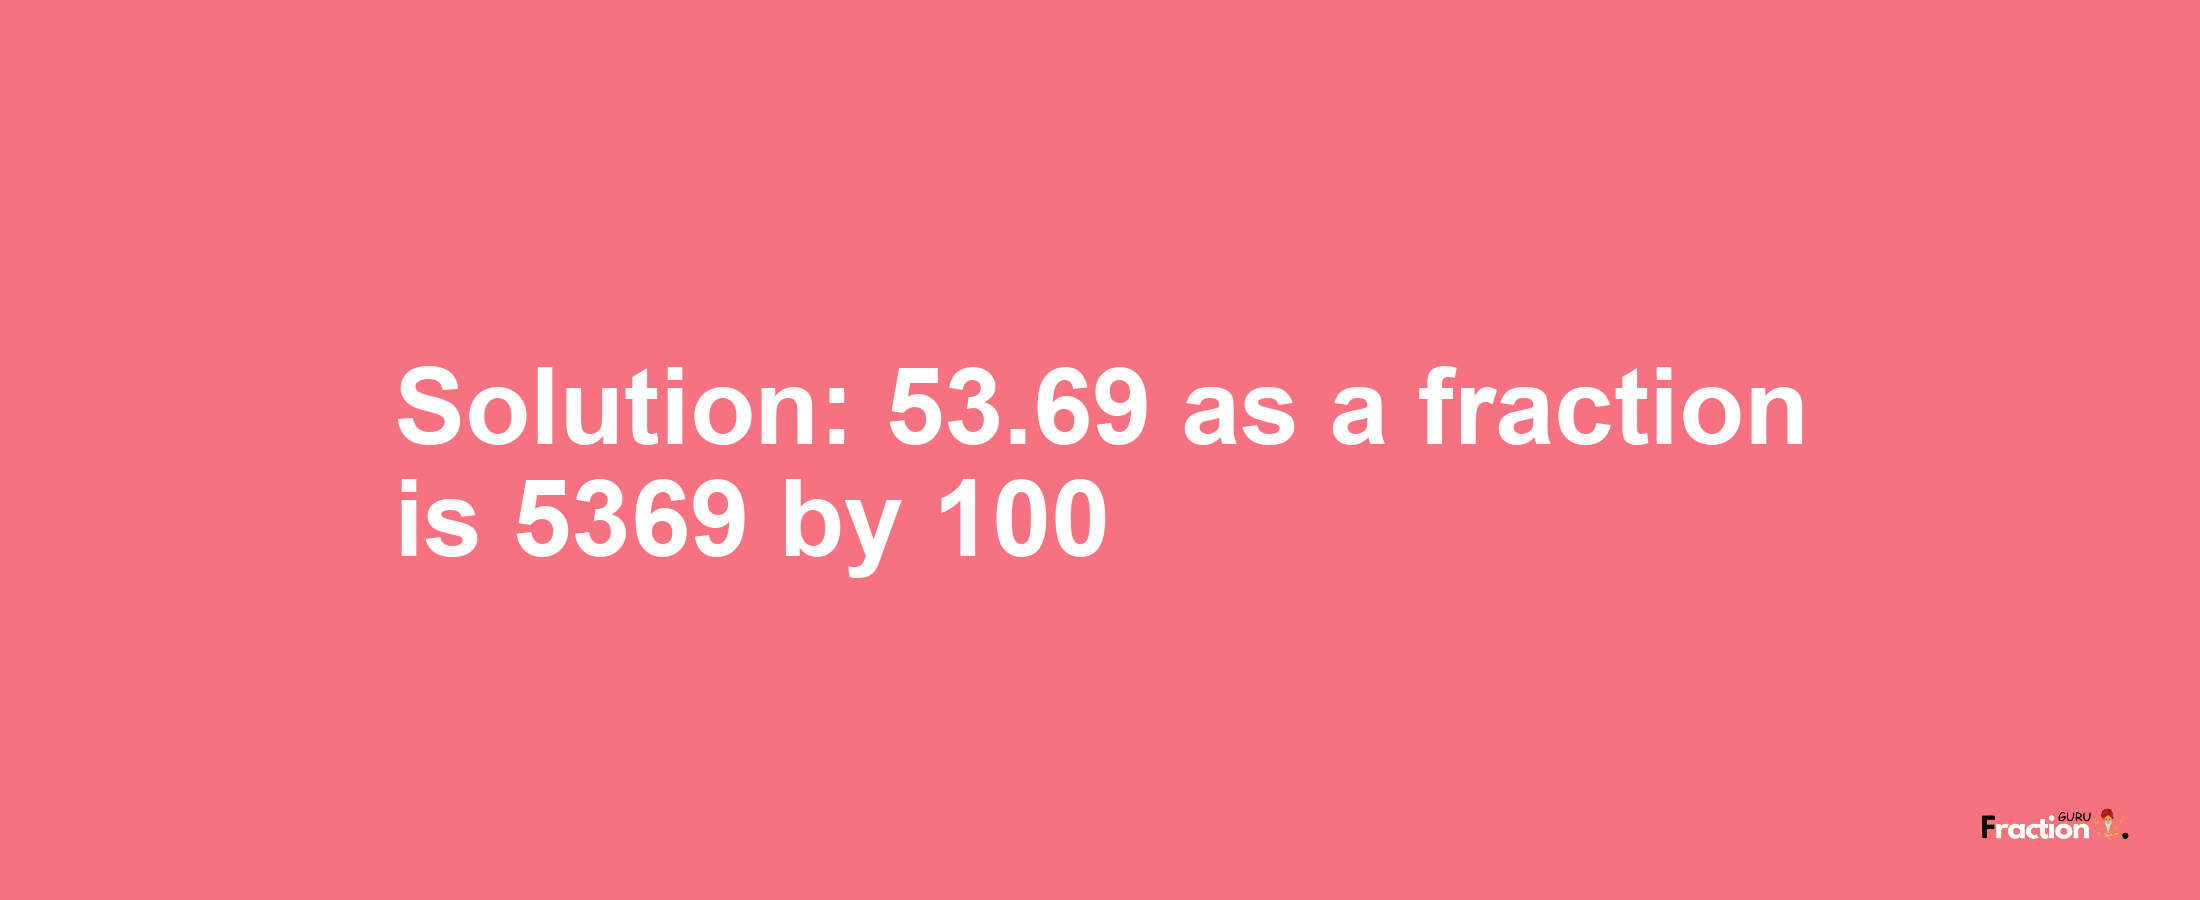 Solution:53.69 as a fraction is 5369/100